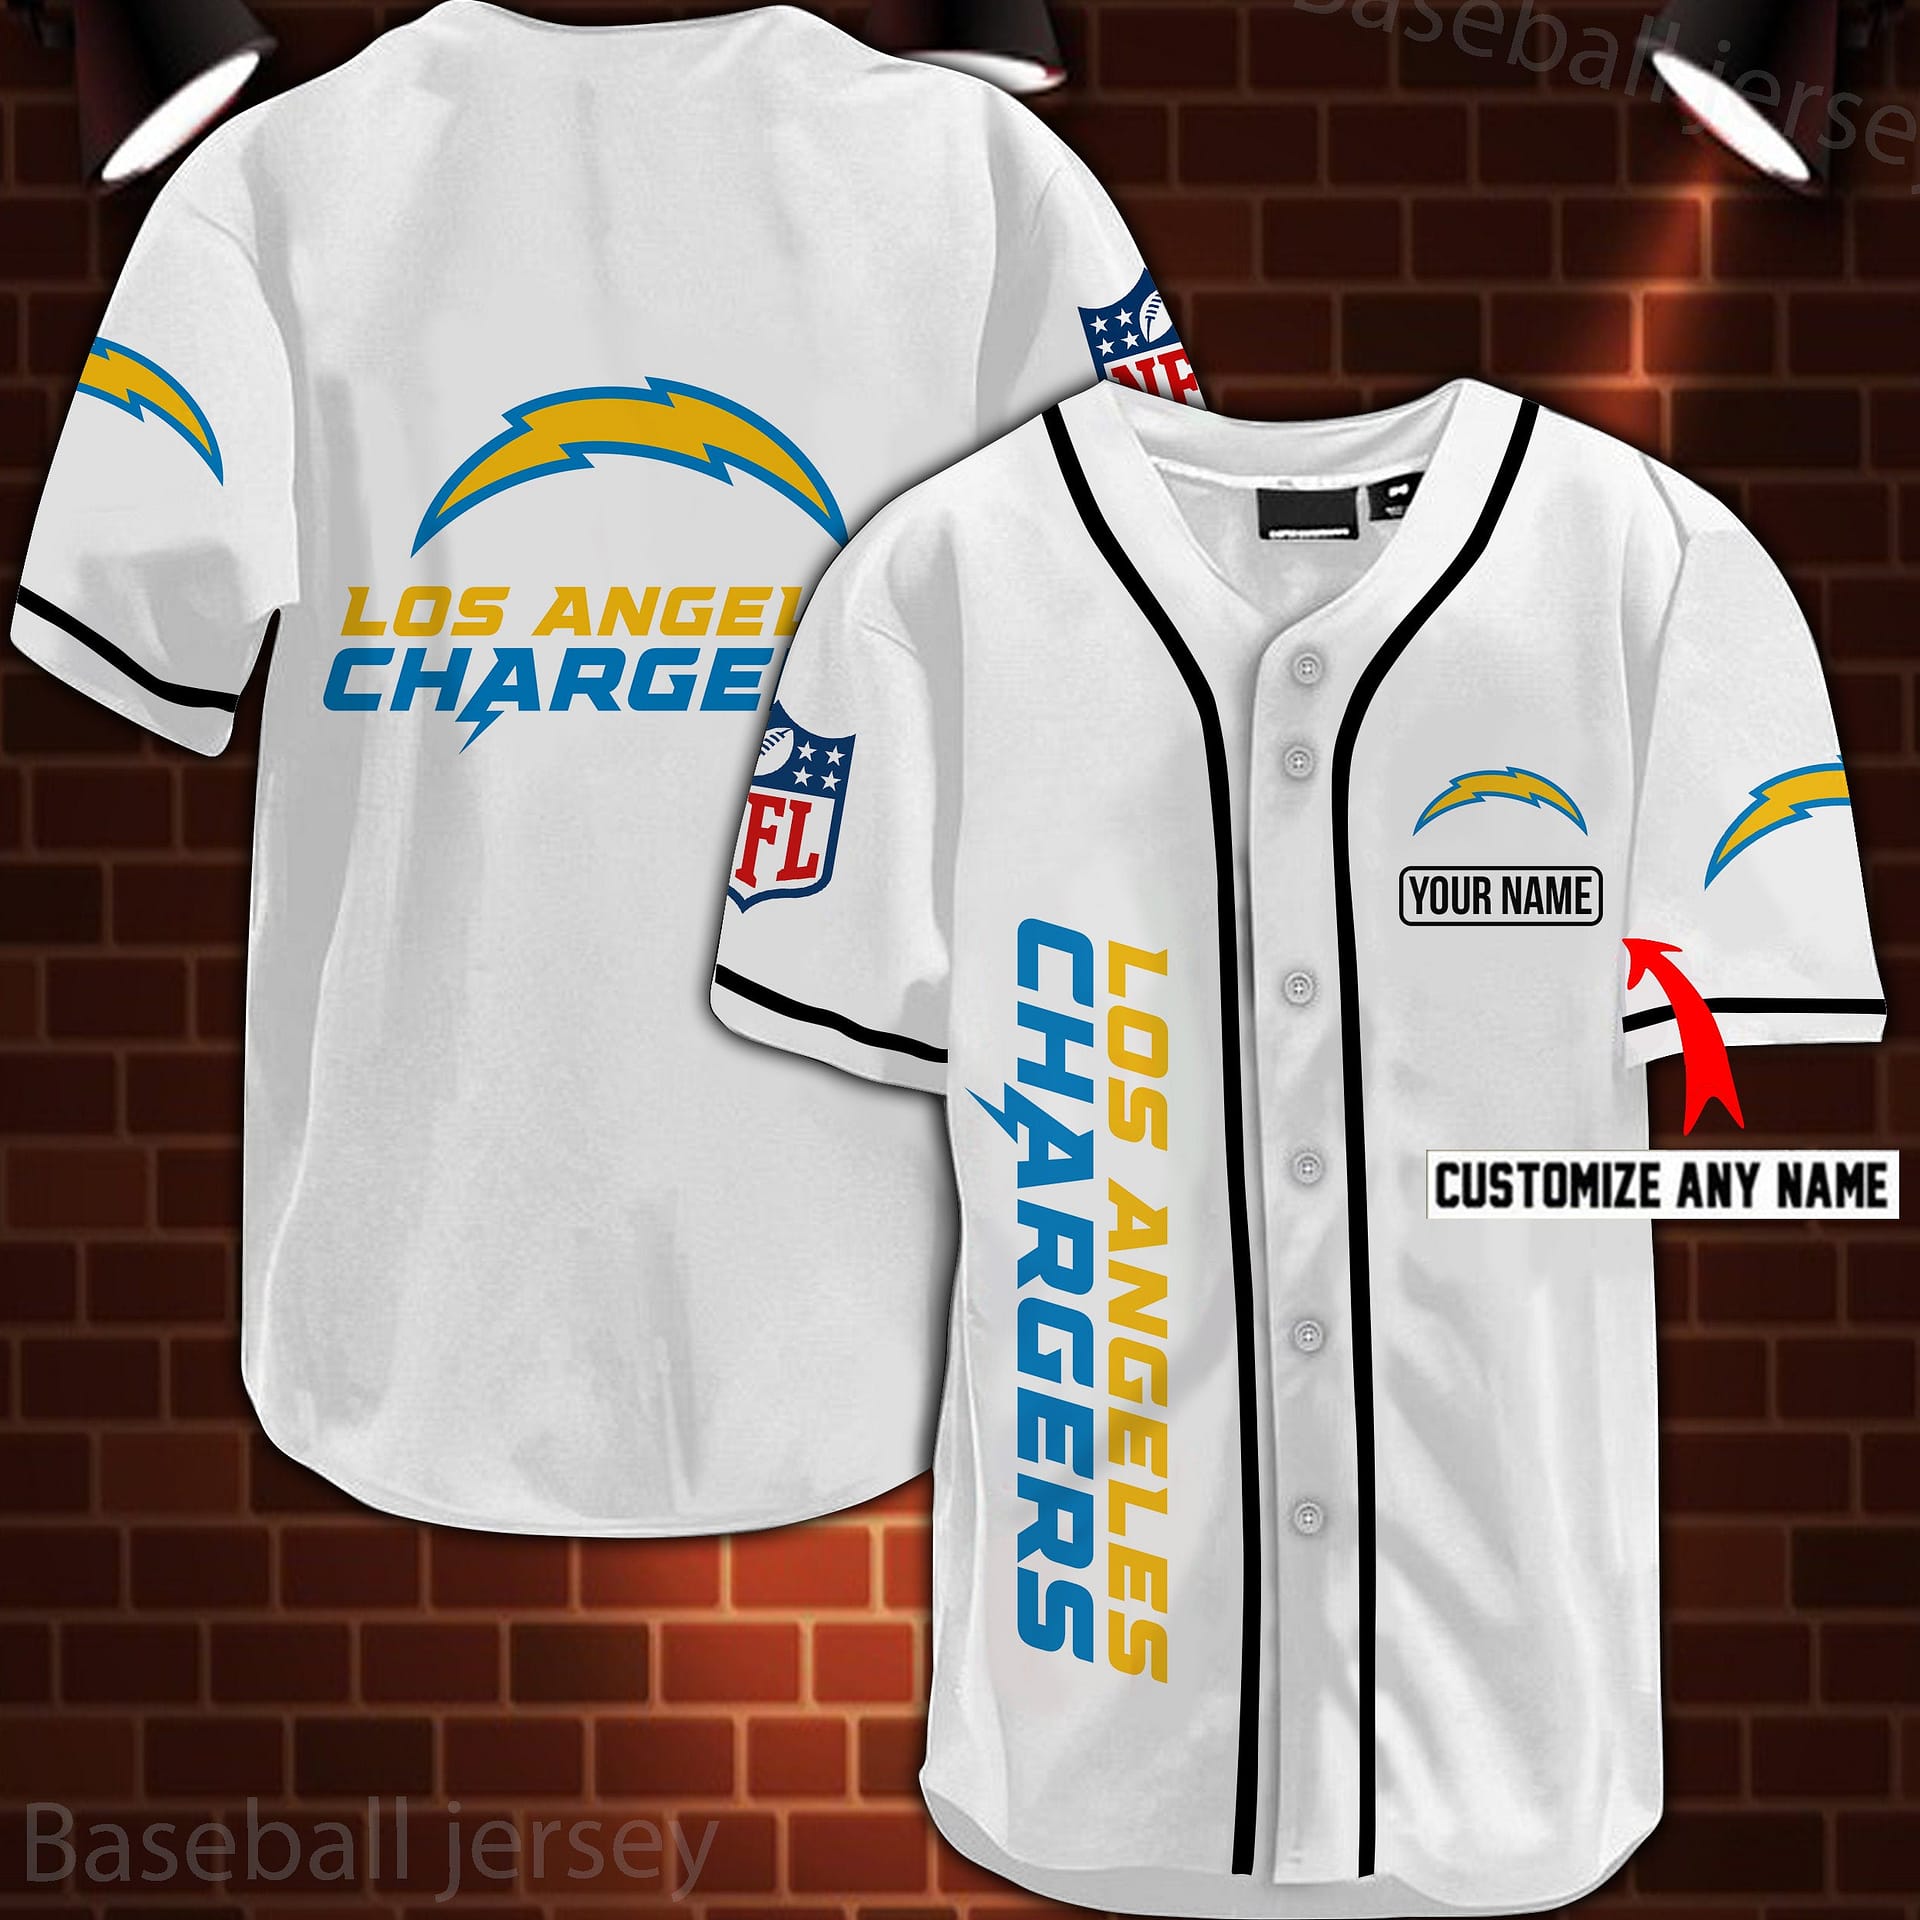 Los Angeles Chargers Nfl 3D Digital Printed Personalized Logo Baseball Jersey